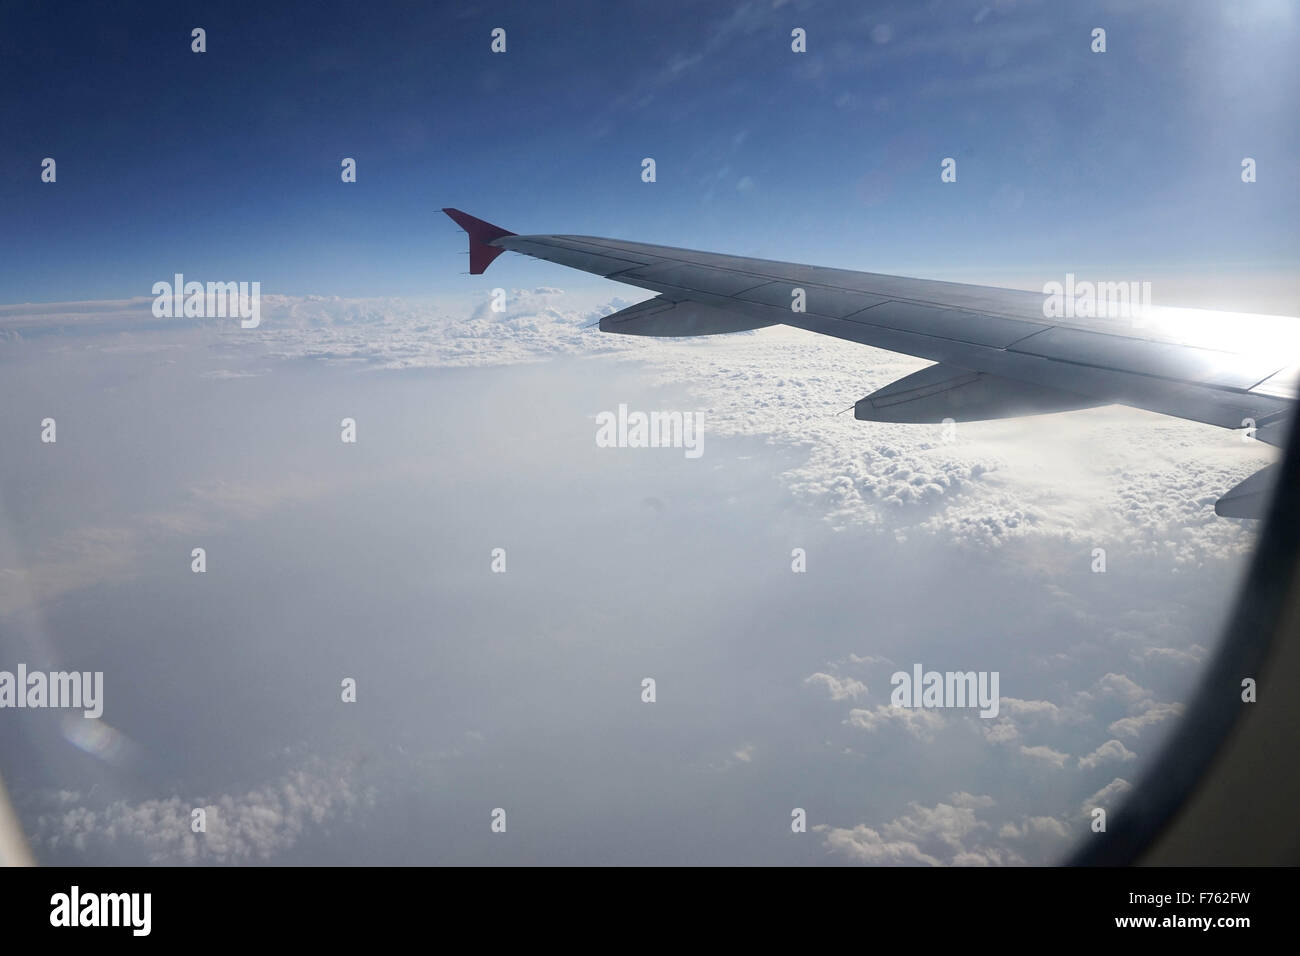 Airplane wing, aeroplane wing, aircraft wing, plane wing, Stock Photo